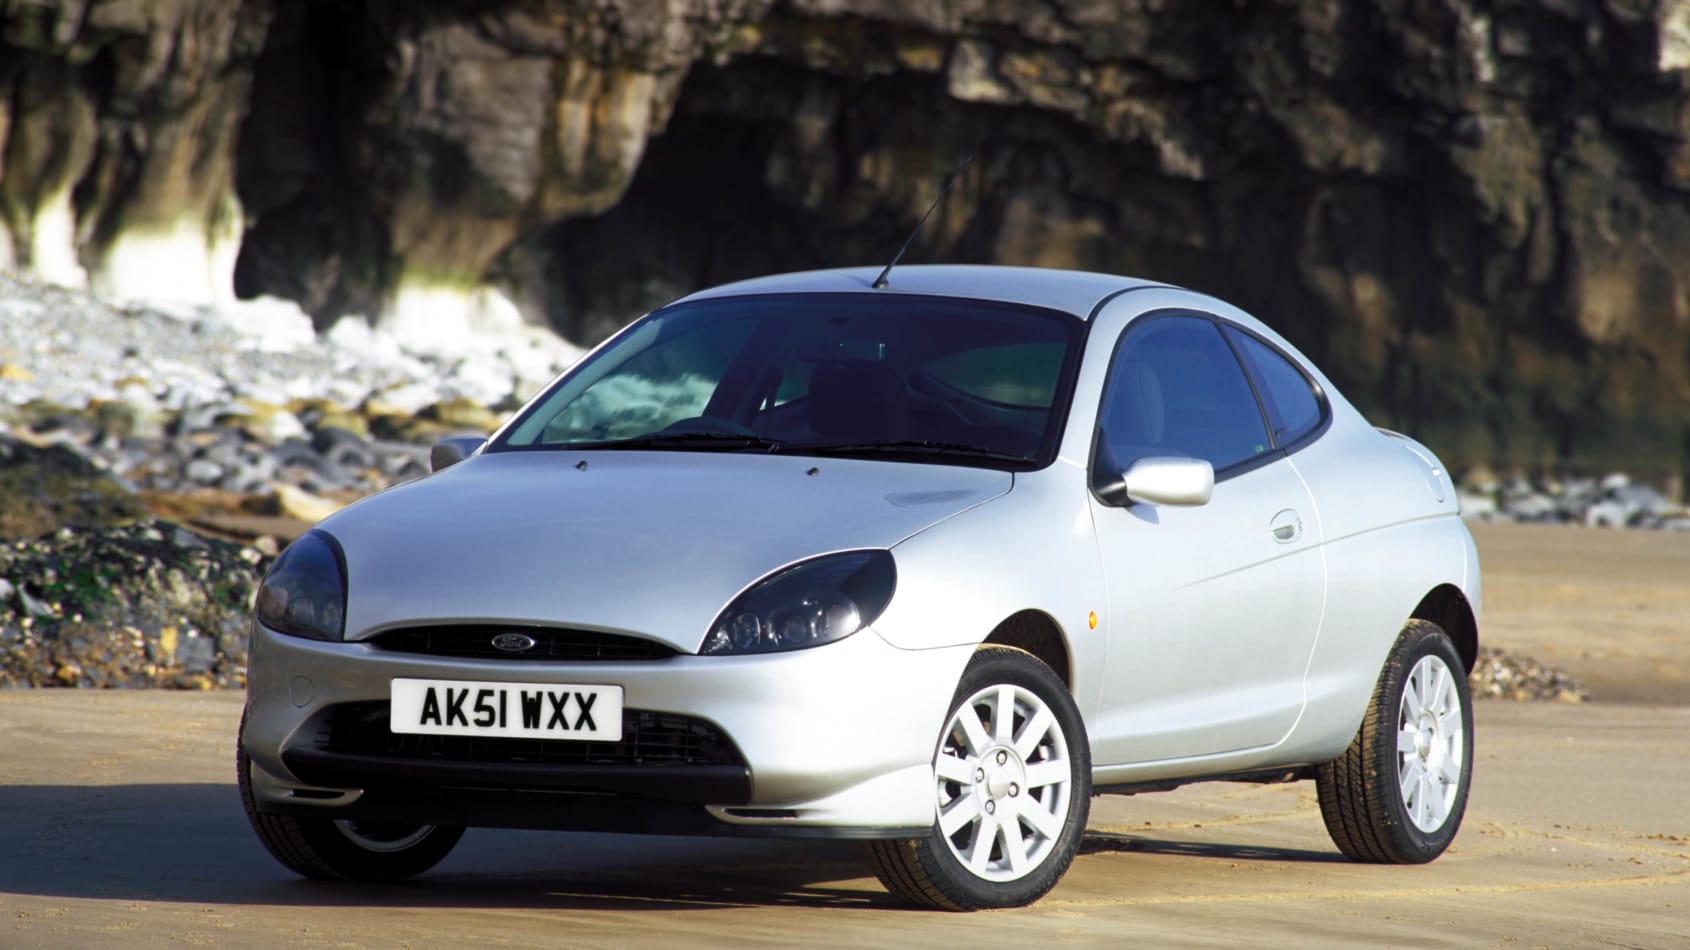 Carbuyer on Twitter: "The new Ford Puma is a sign of the times… 1997 Puma vs 2019 Ford Coupe vs SUV 123bhp 1.7 Zetec vs 123bhp 1.0 Ecoboost £14,550 vs £